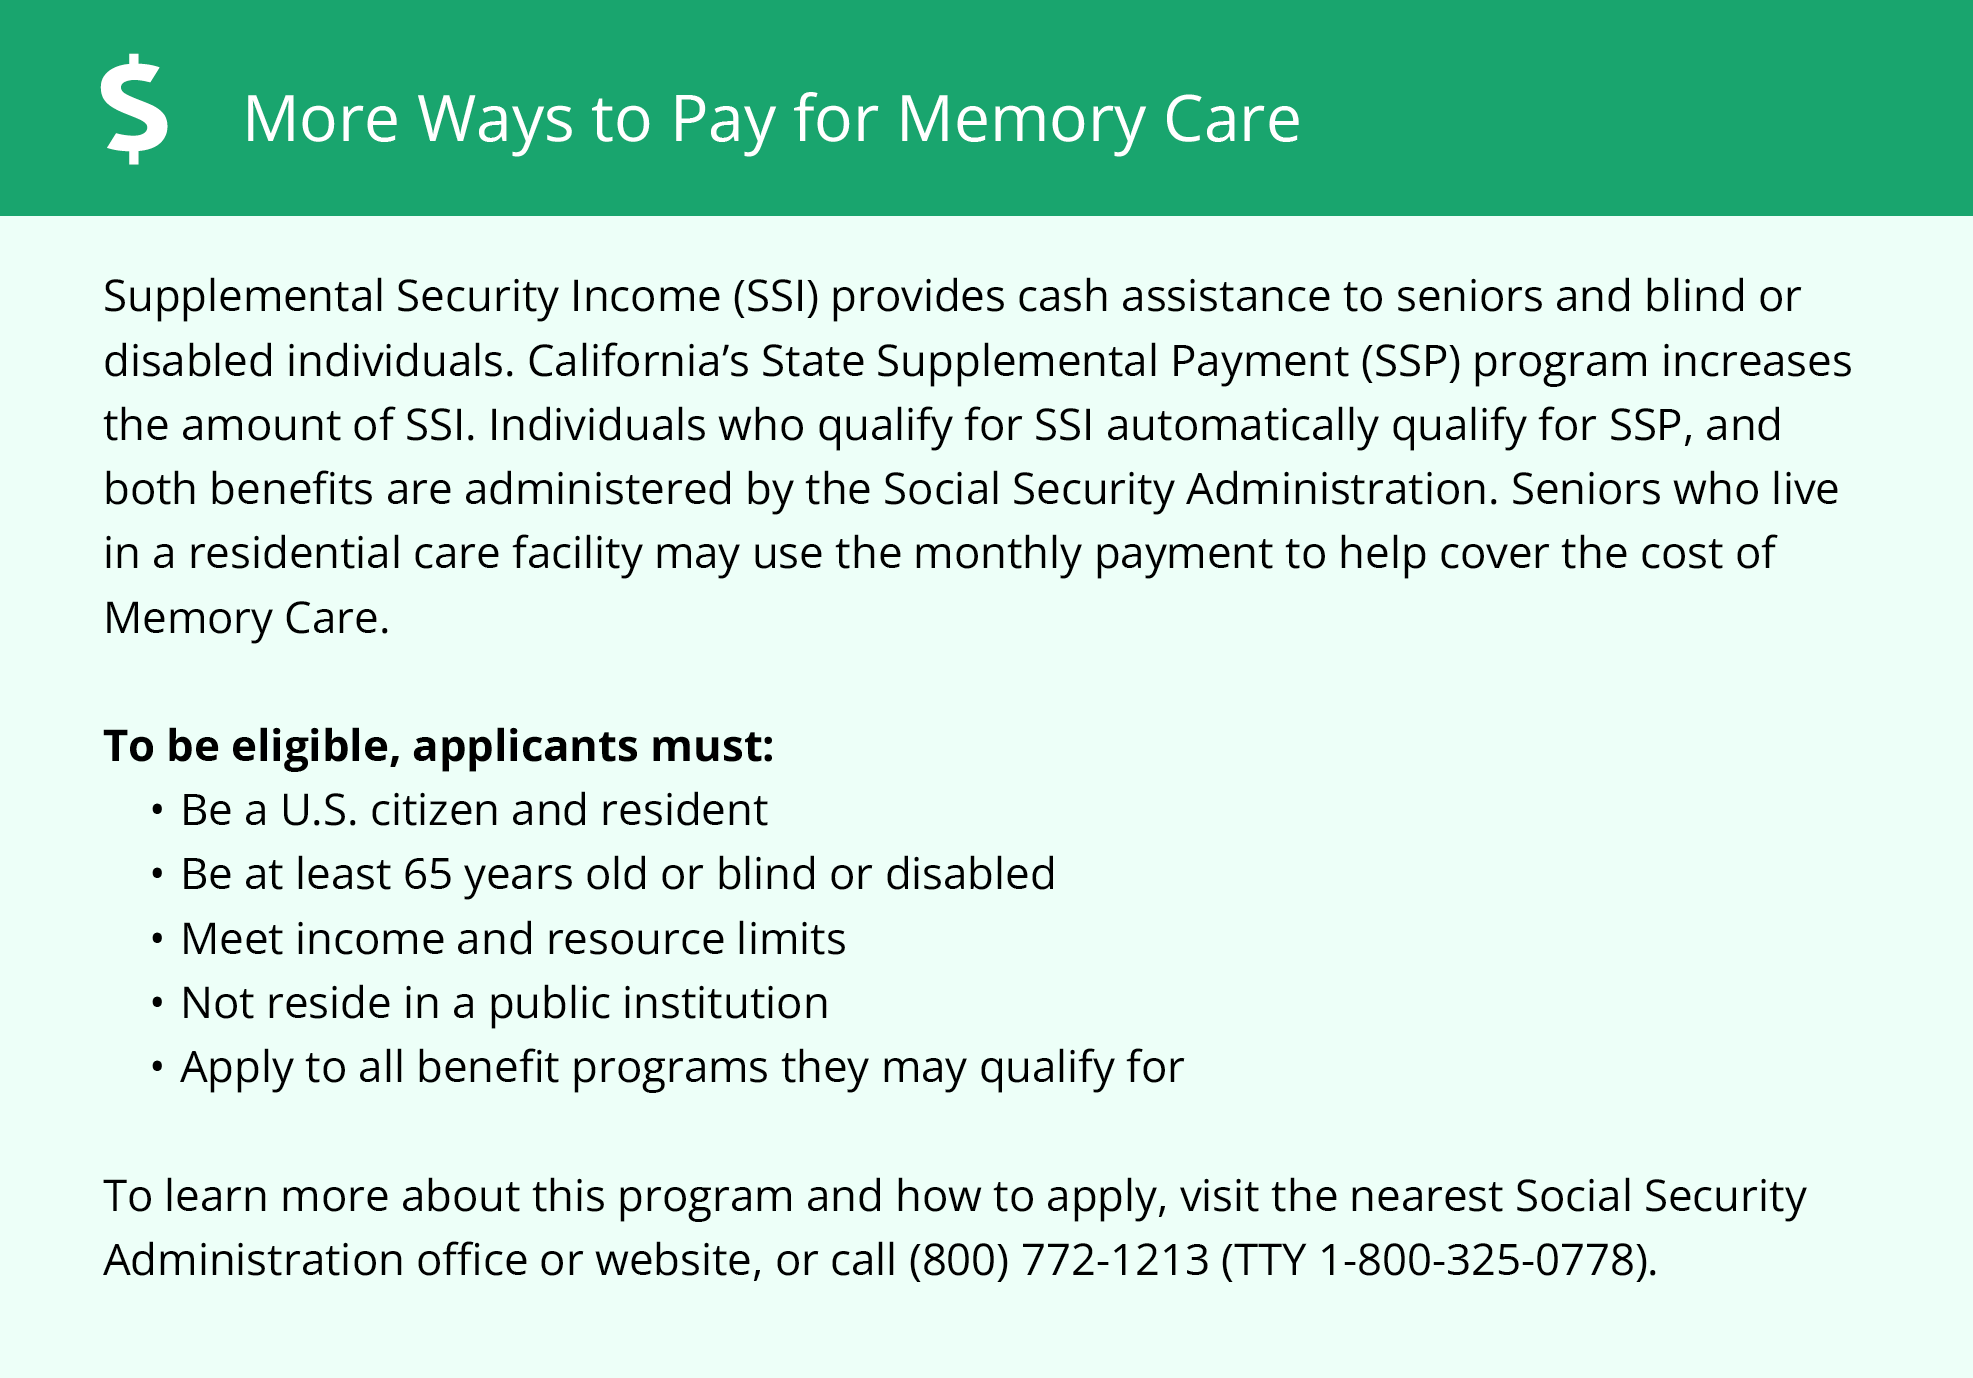 More ways to pay for memory care in California